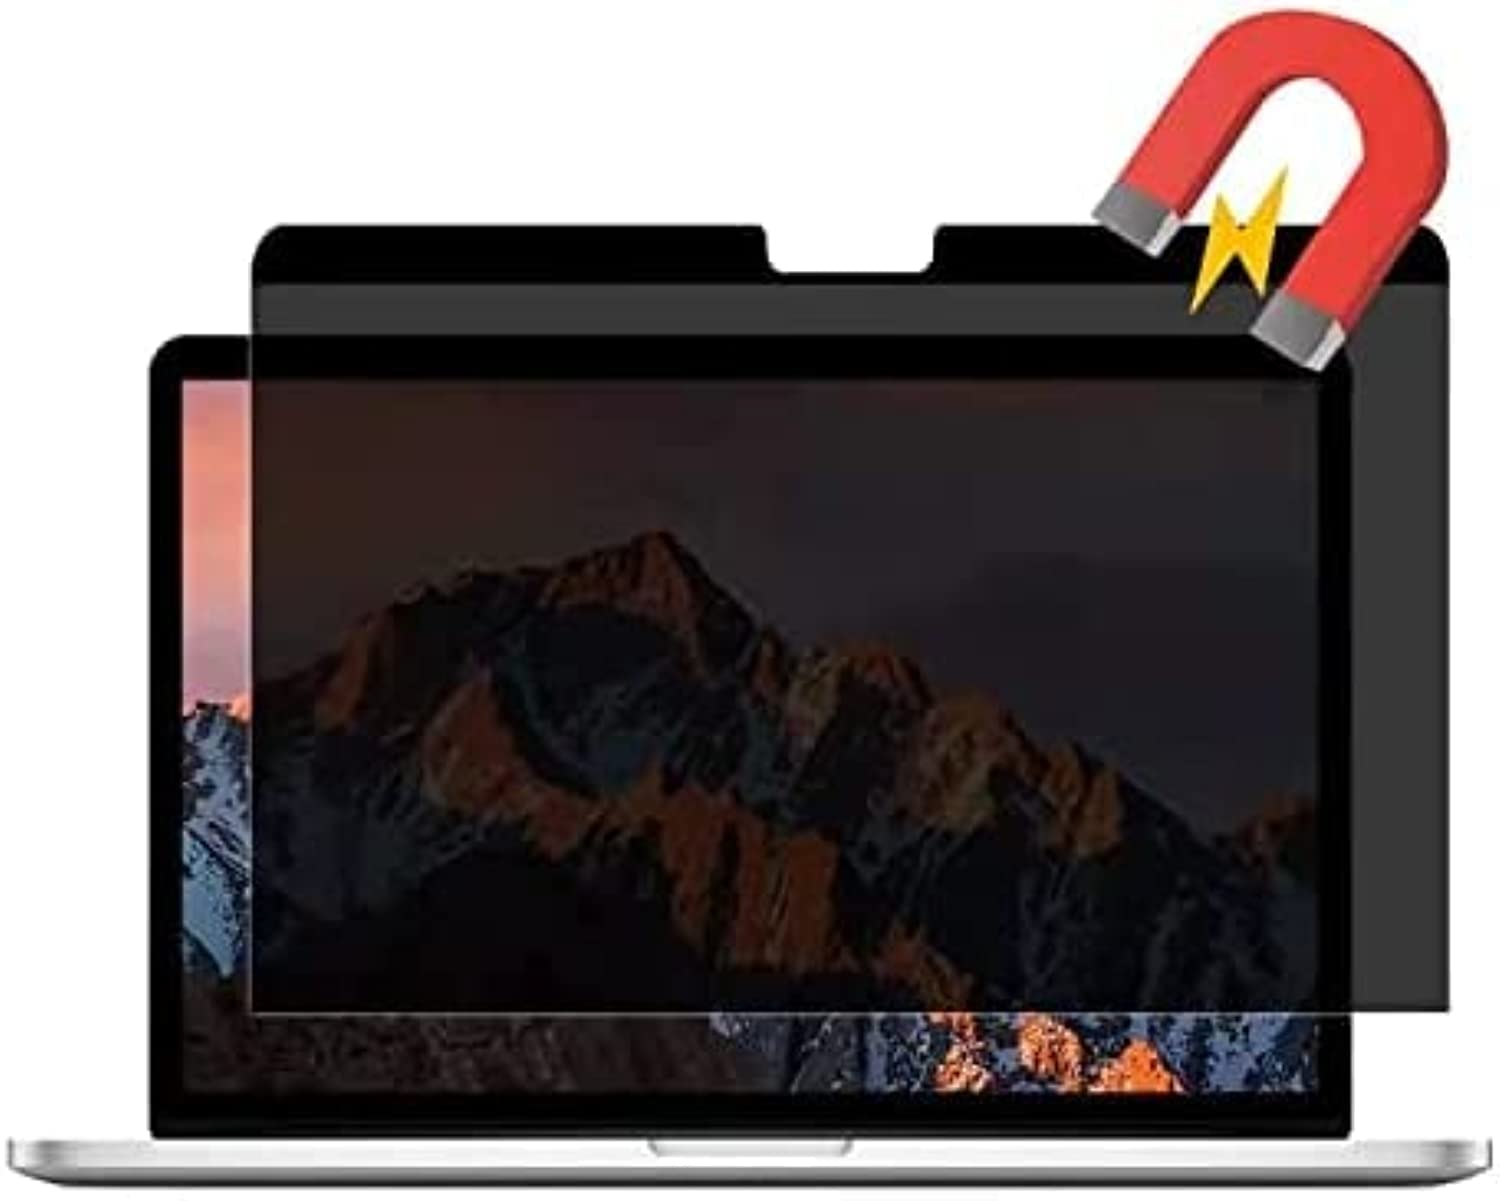 Book Cover Easy On/Off Magnetic Privacy Screen Filter,Compatible with Macbook Pro 13 Inch (2016-2020) and Macbook Air 13 Inch 2018-2020 (A1932,A2179)-Anti Glare